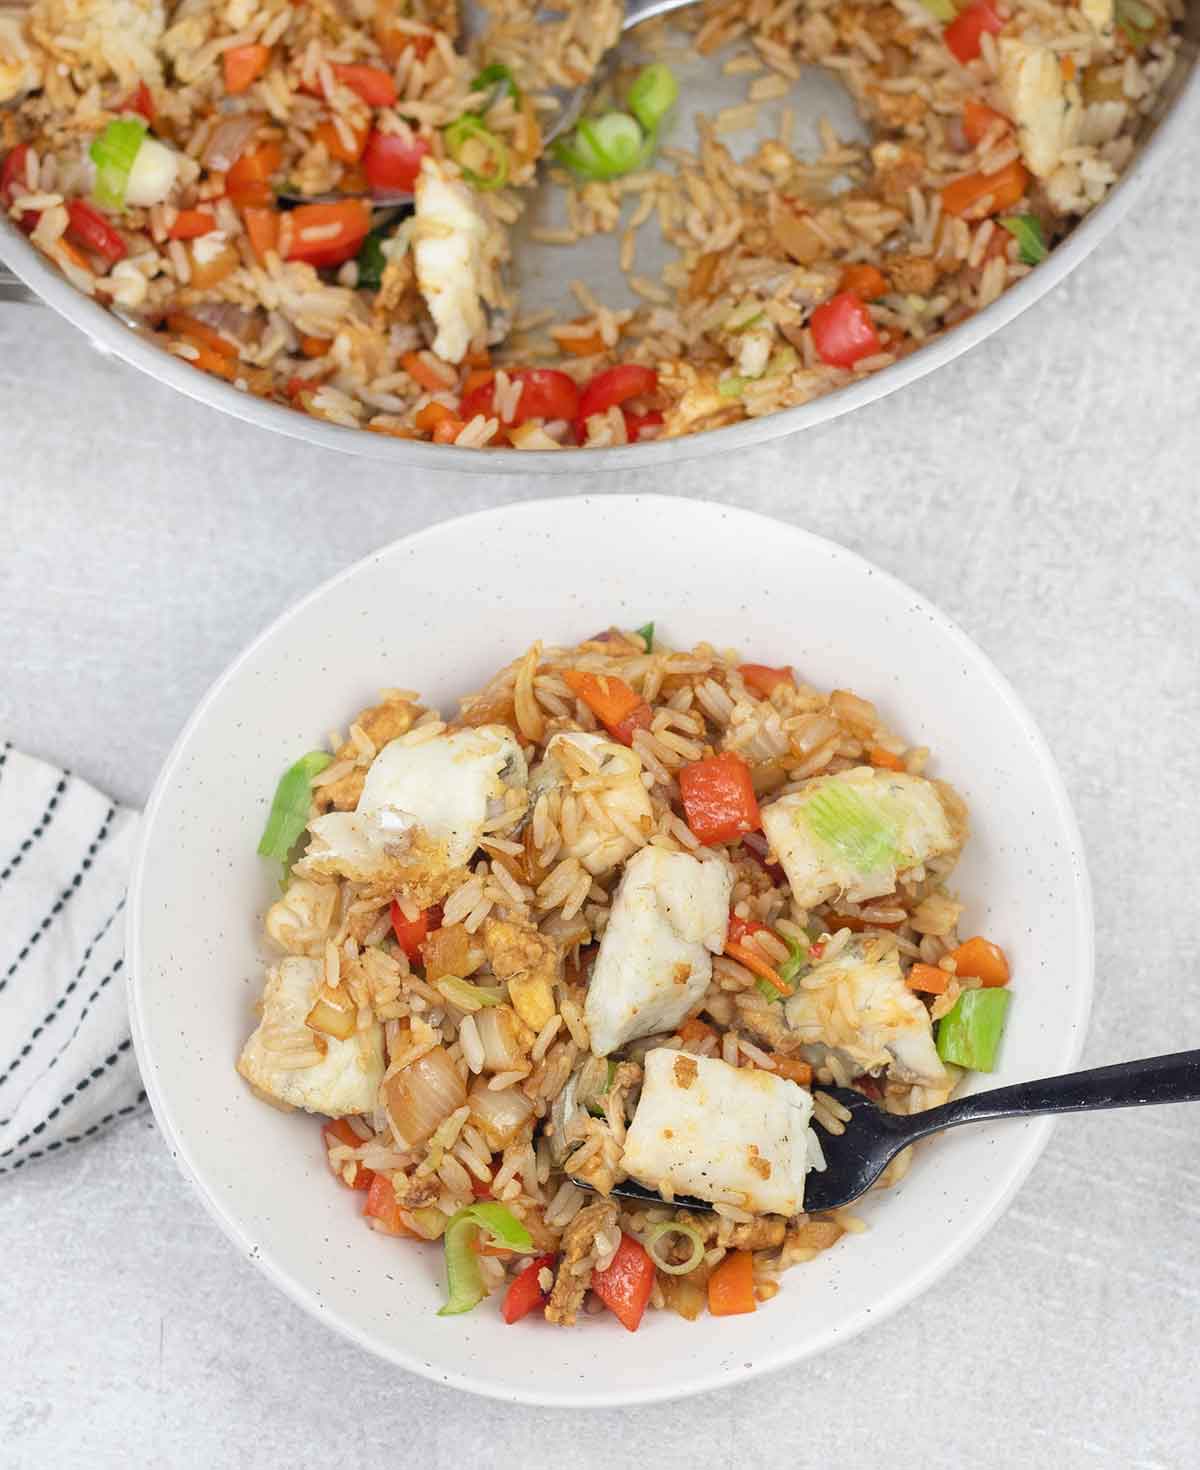 Fish rice with veggies in a bowl.